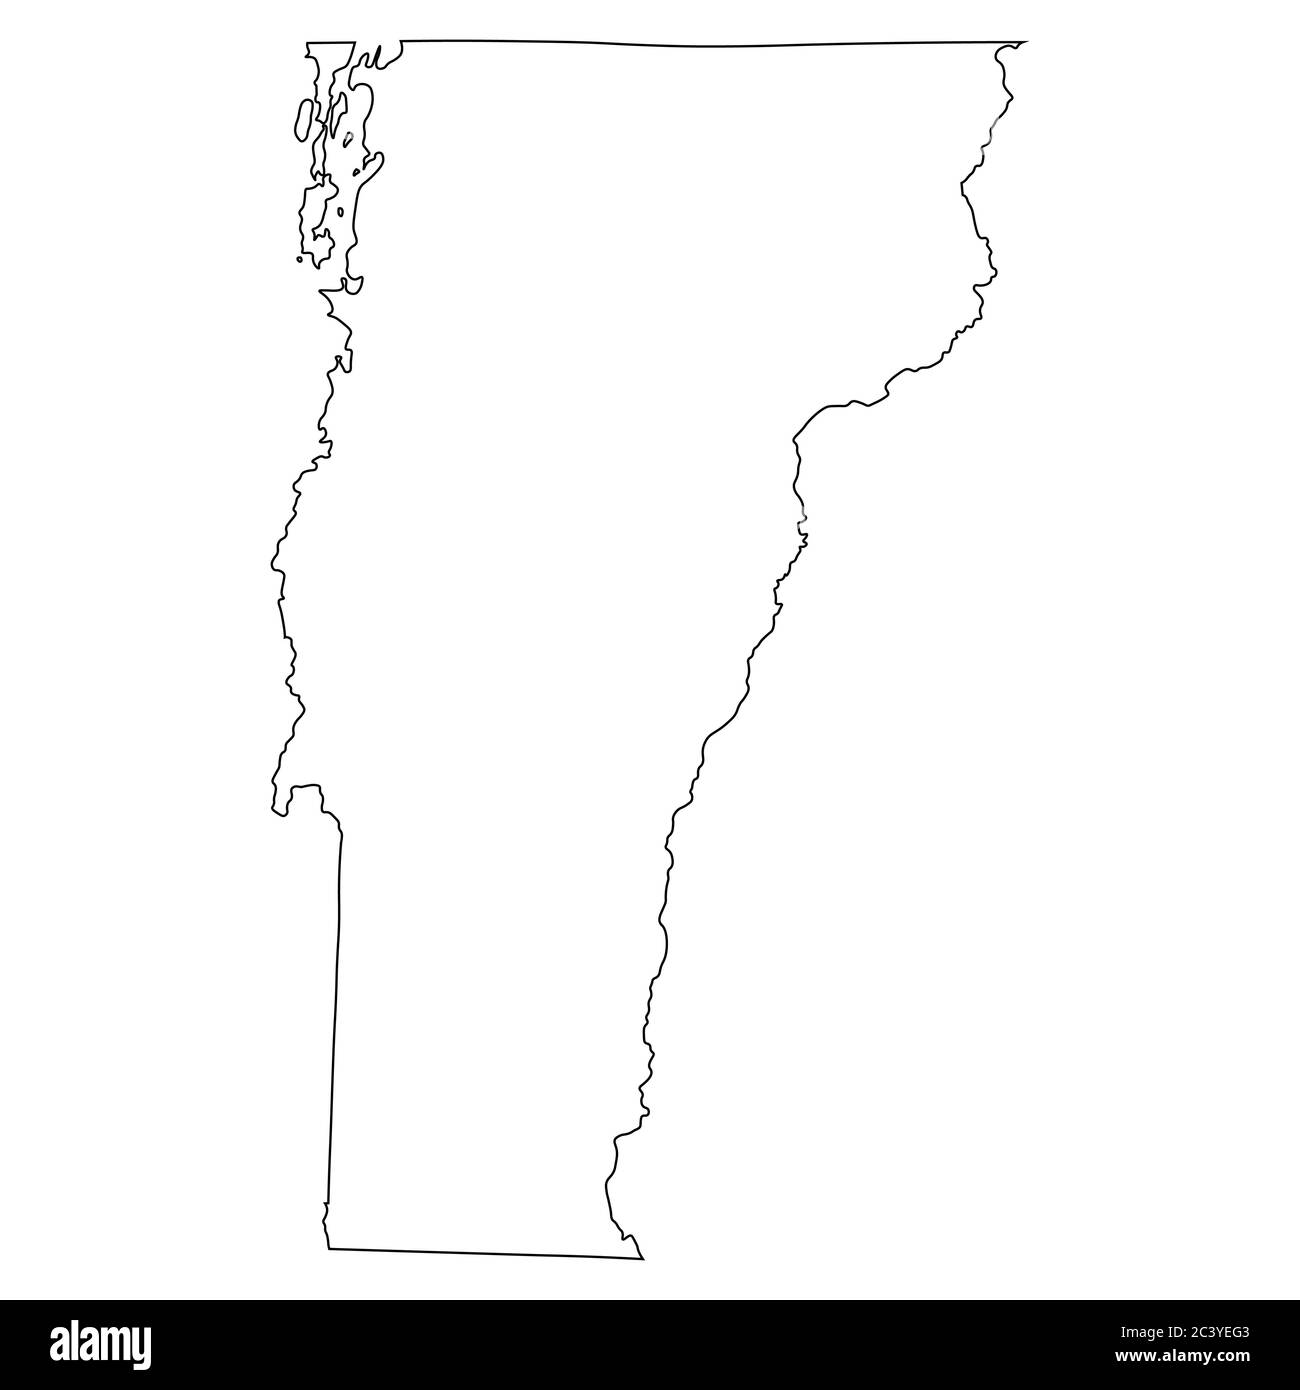 Vermont VT state Map USA. Black outline map isolated on a white background. EPS Vector Stock Vector